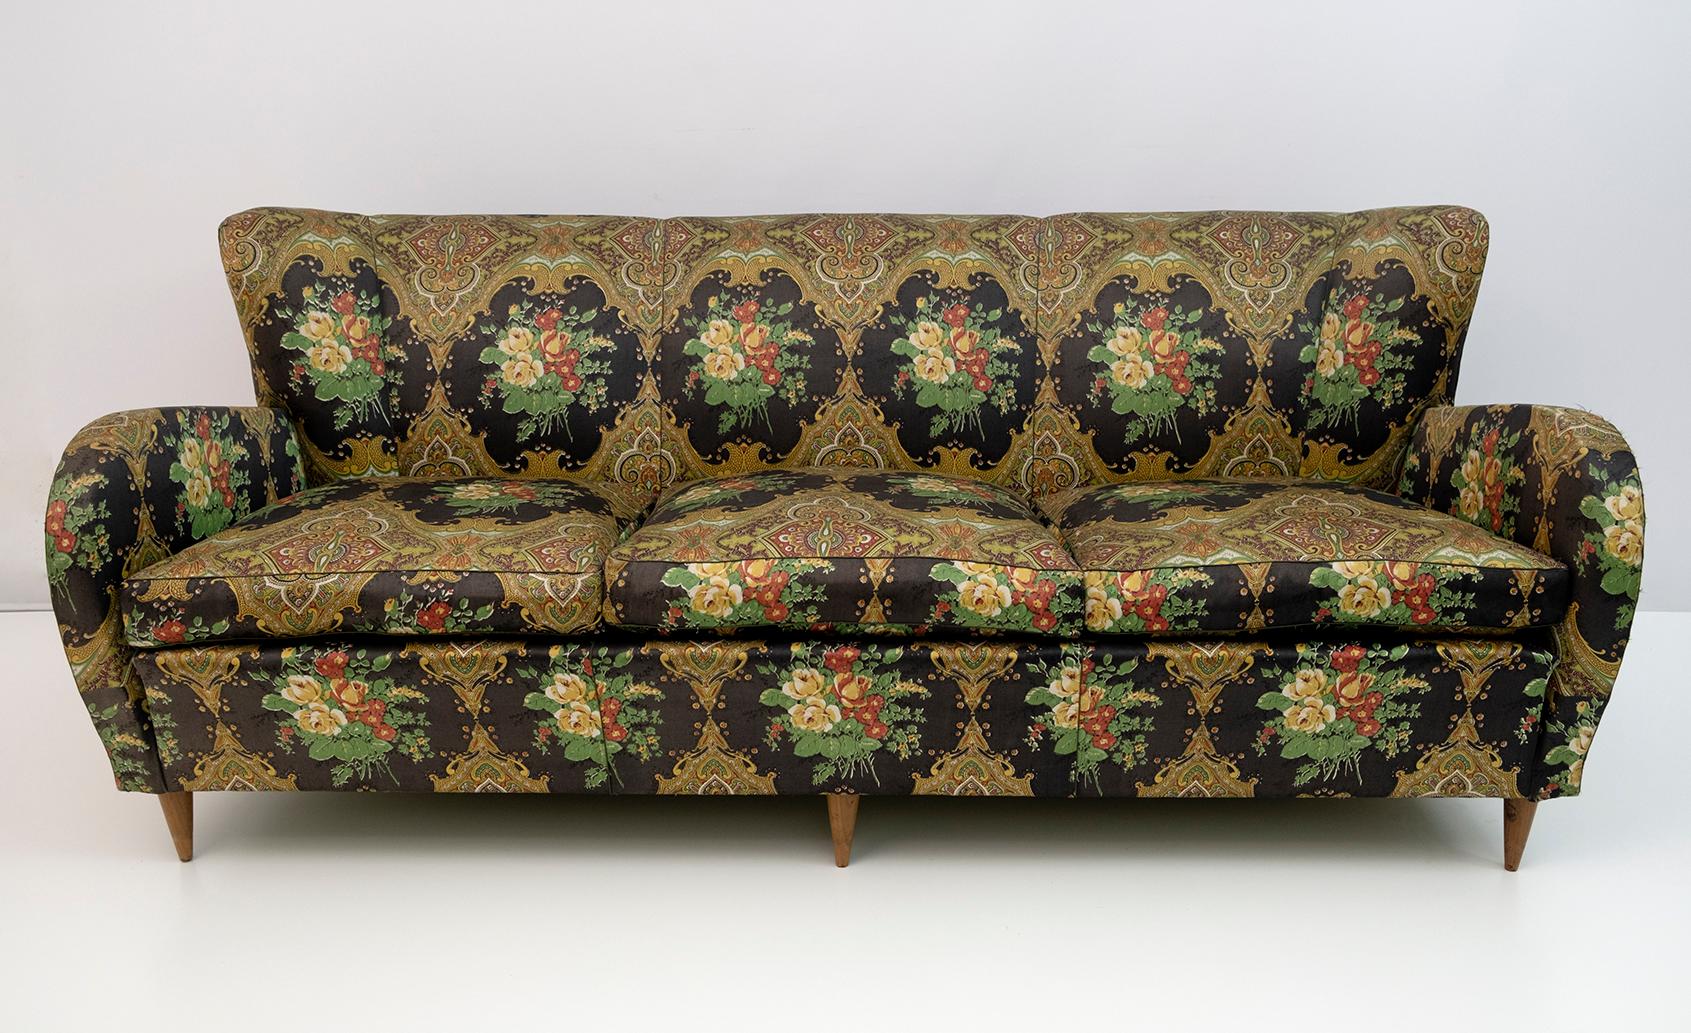 Italian three-seater sofa from the 1950s. The structure and legs are in beech and fir, the cushions in goose down, the sofa was upholstered in the 90s but the fabric is faded and worn.
Condition as shown in the photos, it is advisable to redo the